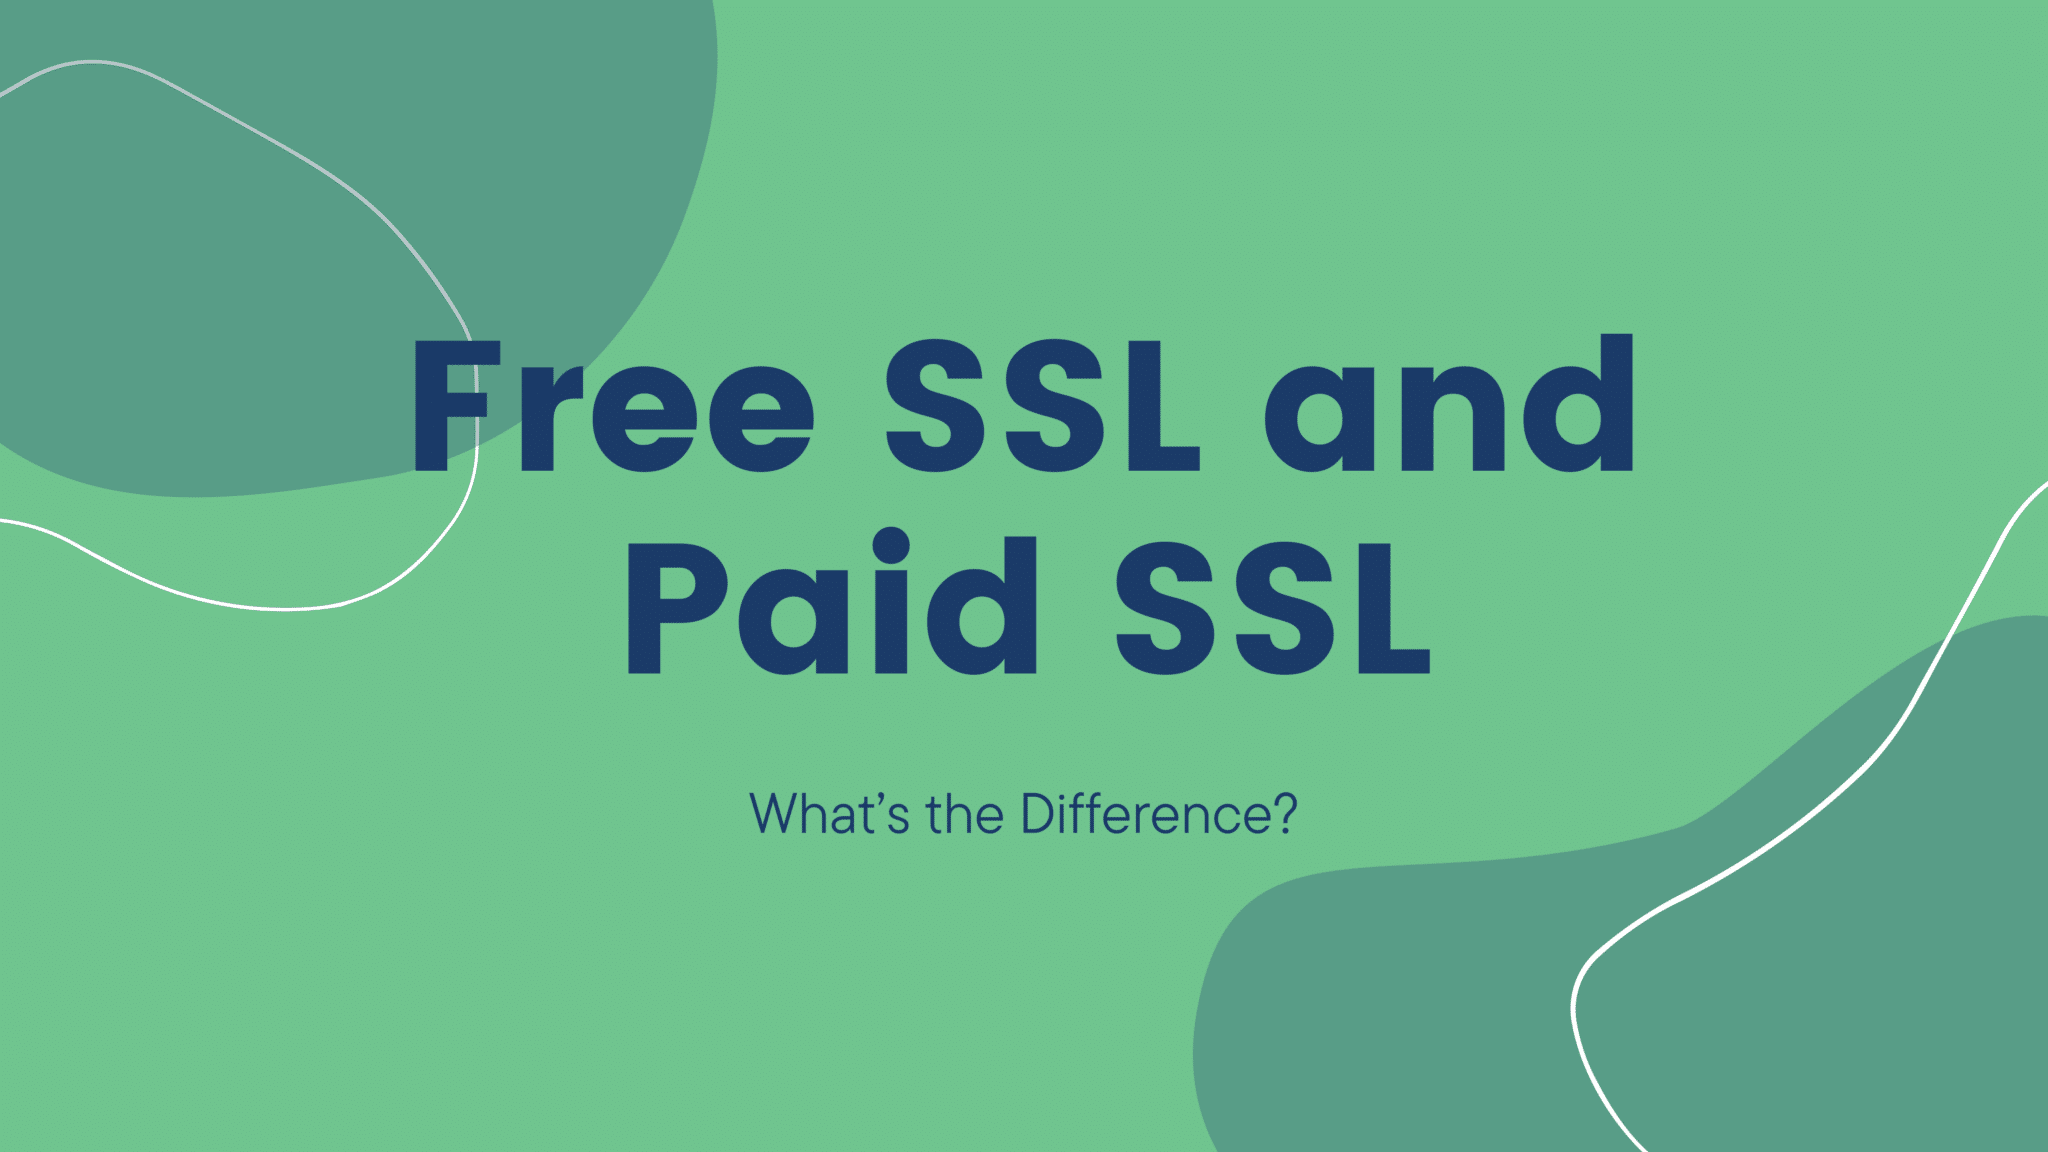 This image is comparing the differences between free and paid SSL certificates.